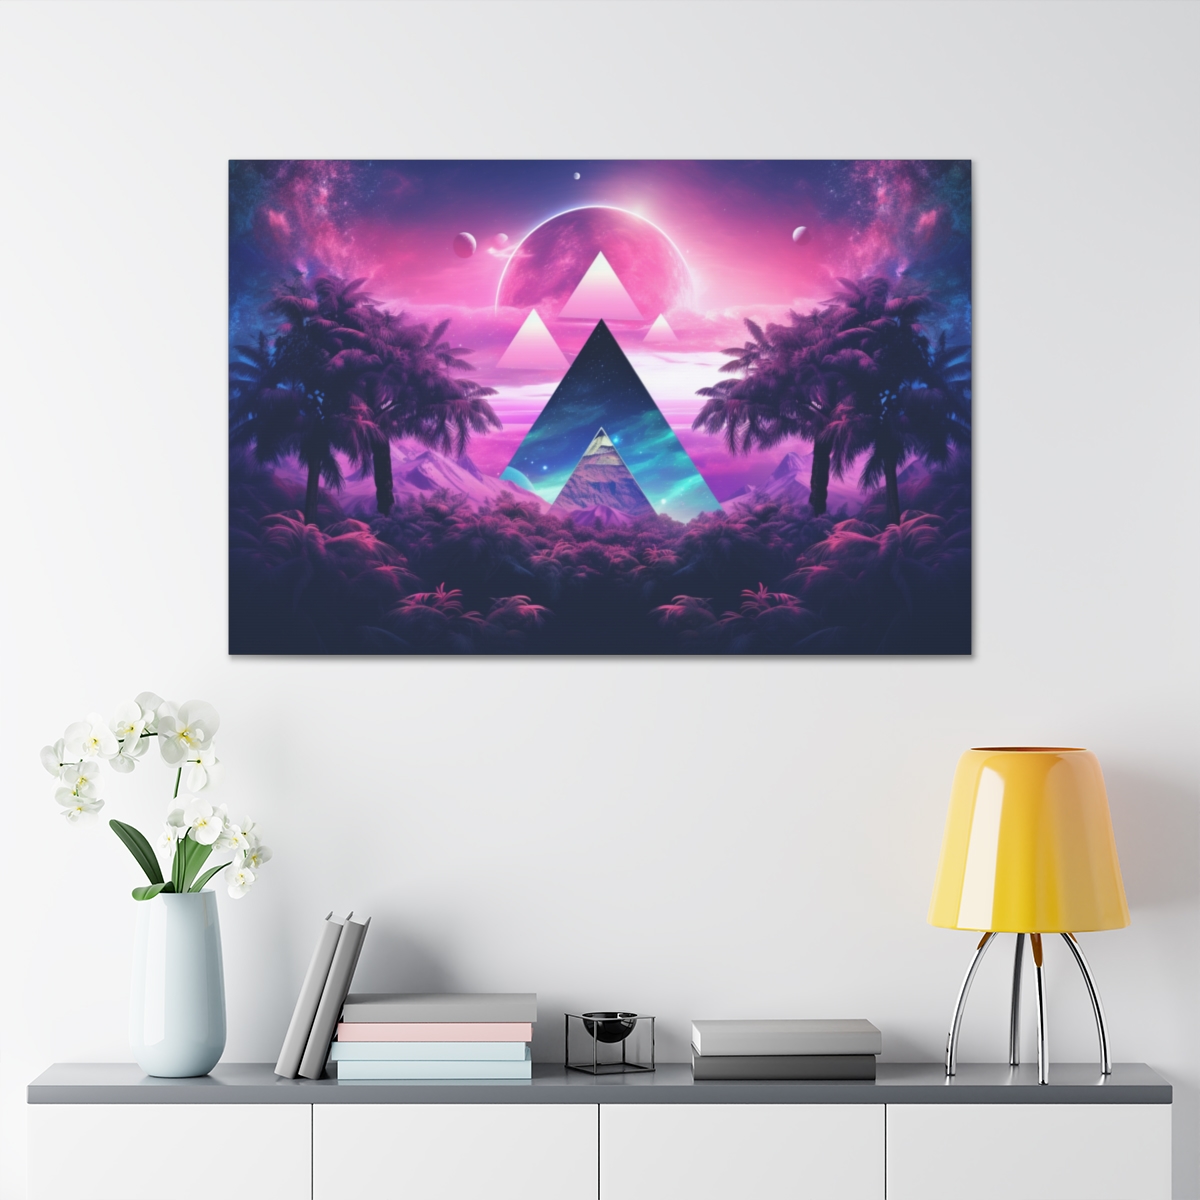 Retro Geometric Ethereal Art: Prism Of Truth